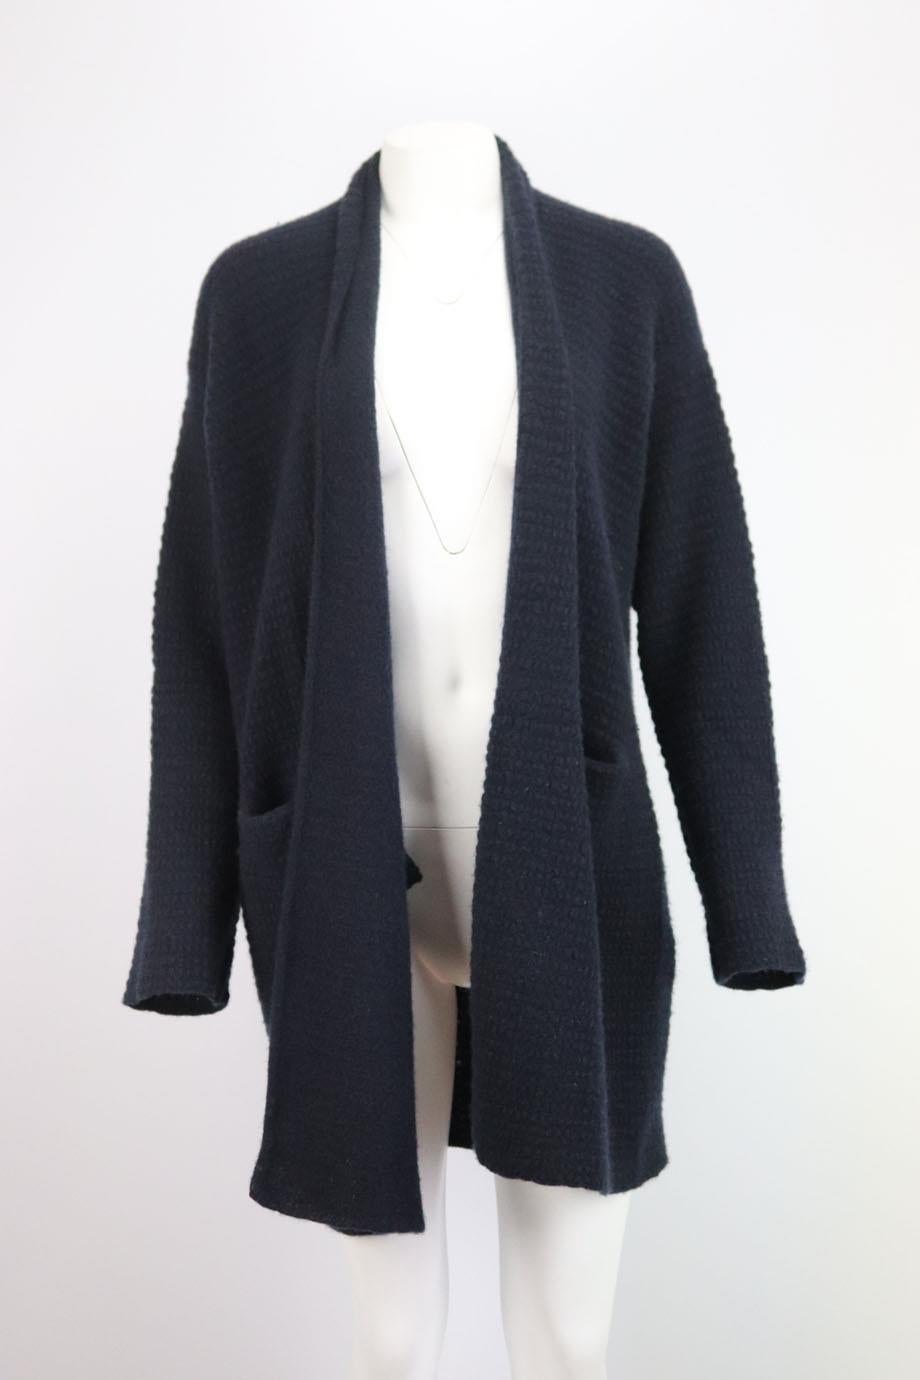 This cardigan by Lainey Keogh is knitted from the softest cashmere with a textured finish and has a loose oversized open fit in a beautiful navy hue. Navy cashmere. Slips on. 100% Cashmere. Size: One Size. Bust measures approx. 40 inches. Waist